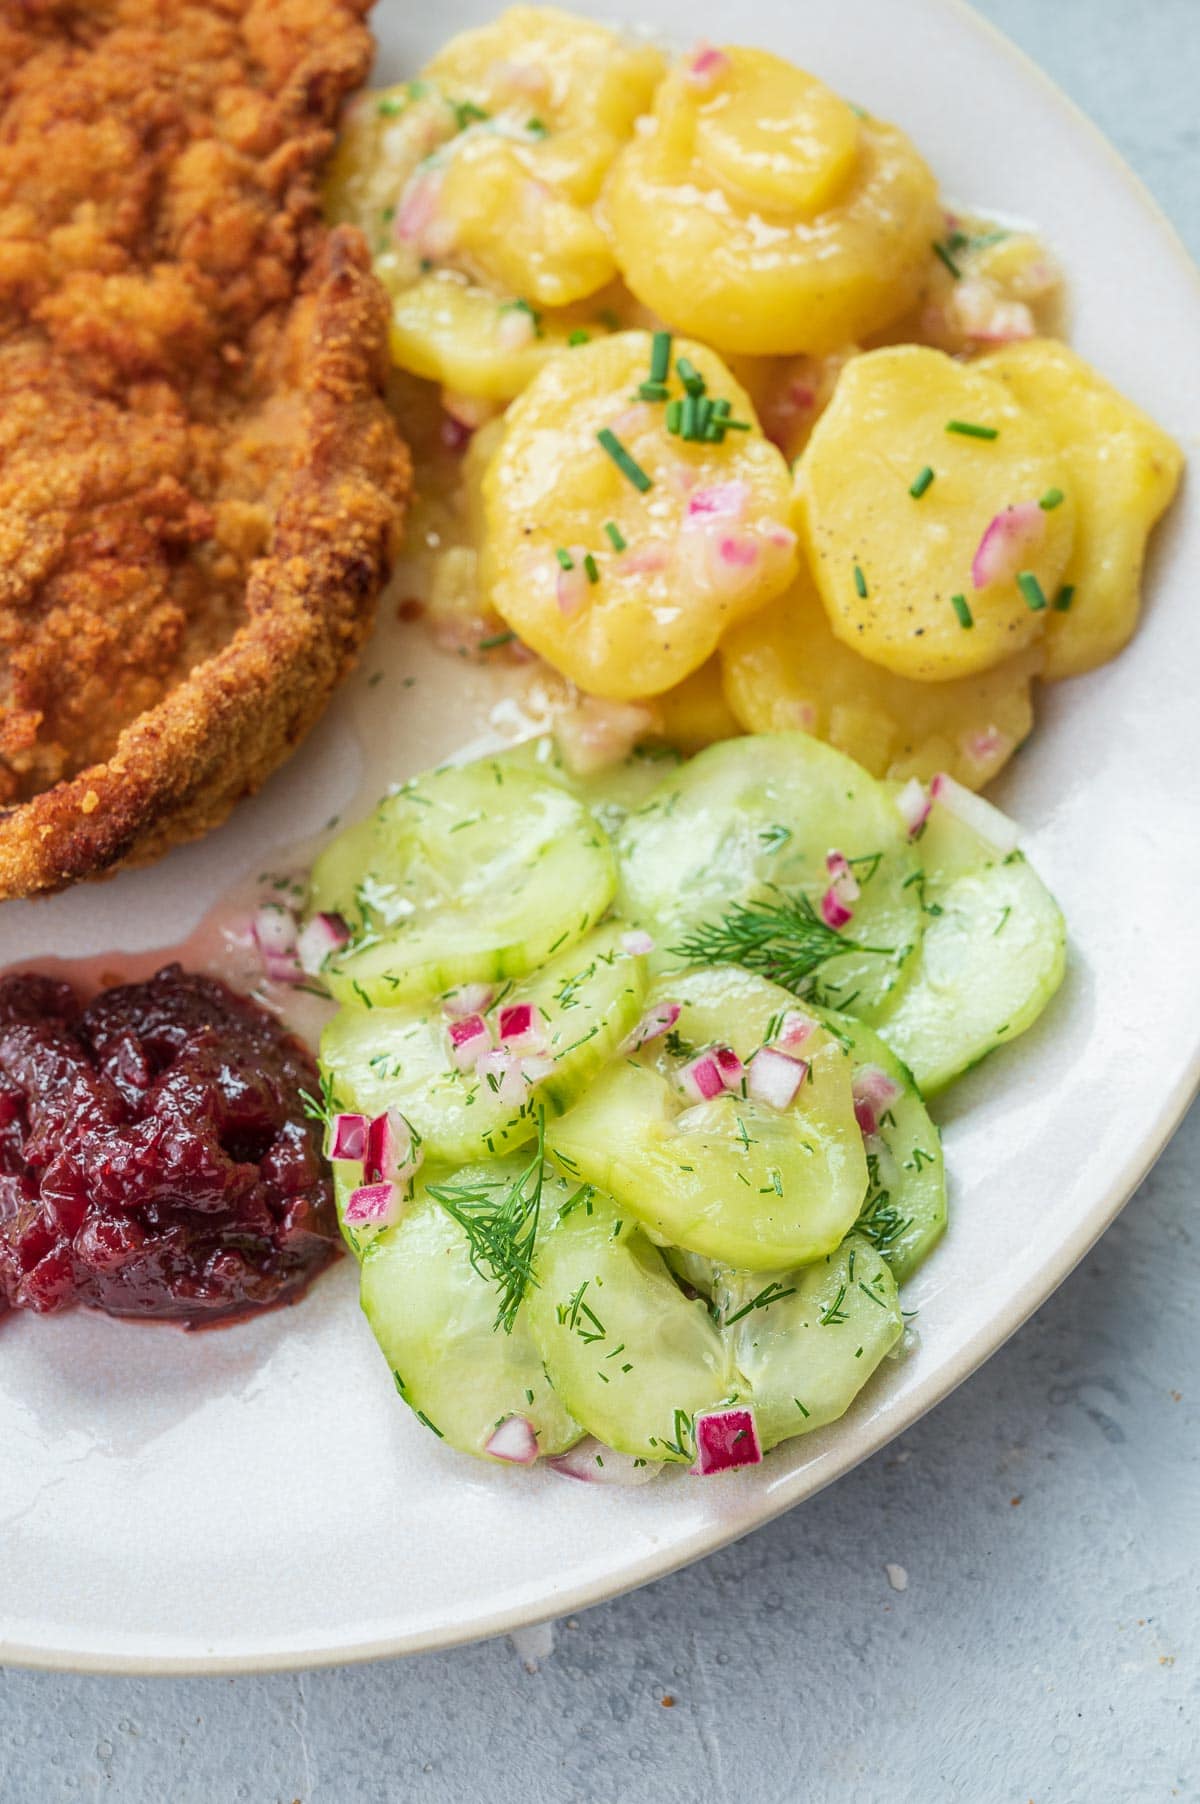 German cucumber salad on a beige plate with potato salad, Wiener Schnitzel and red currant preserves.